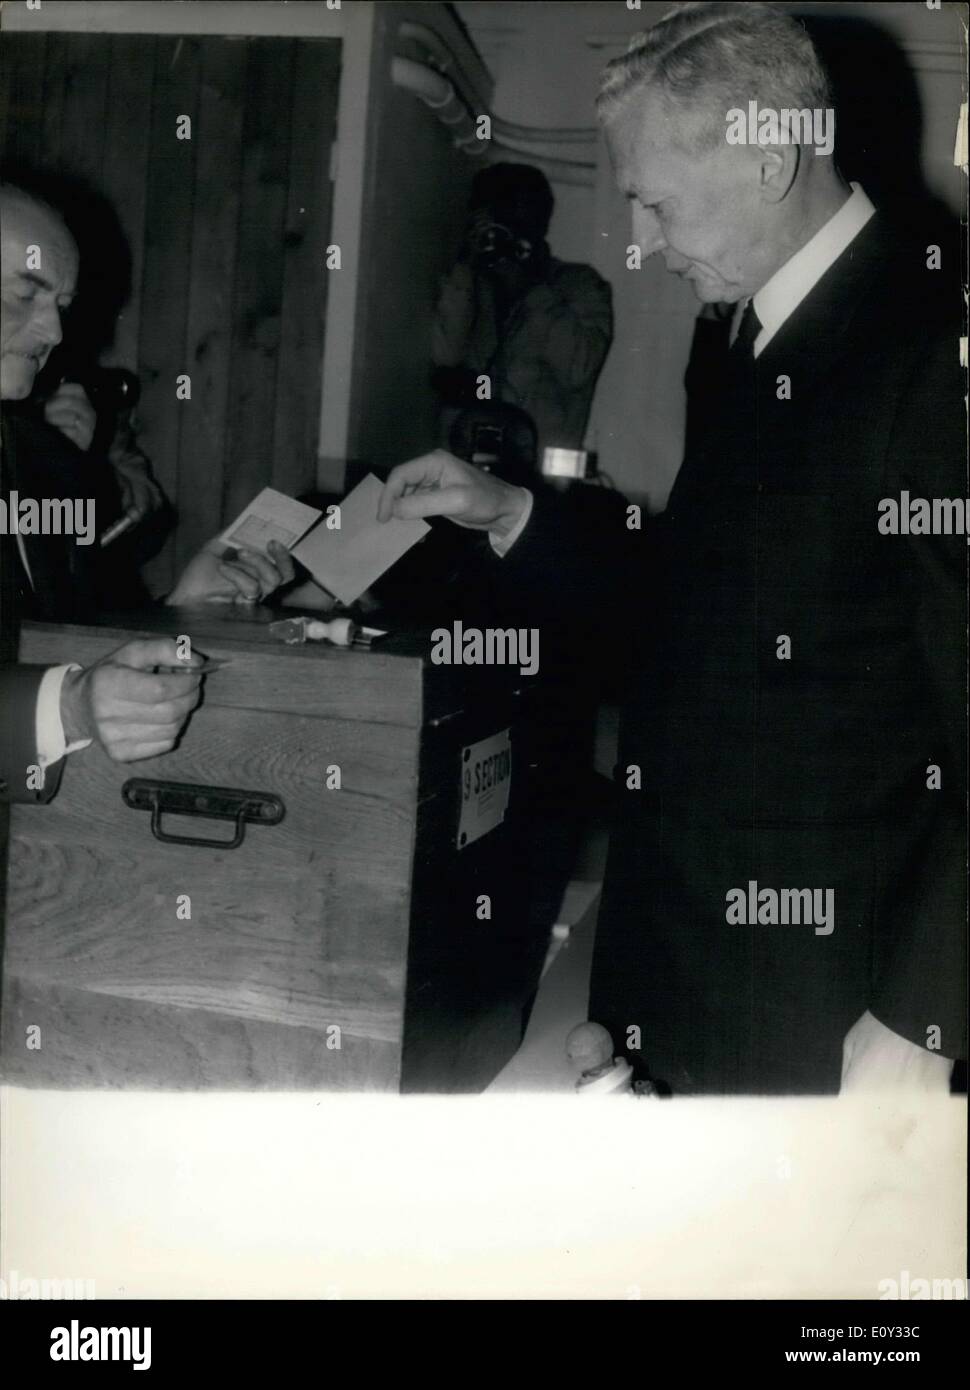 Jun. 23, 1968 - Many of the French chose to leave this weekend before casting their votes, but not Couve de Murville, who is seen here casting his ballot. Stock Photo